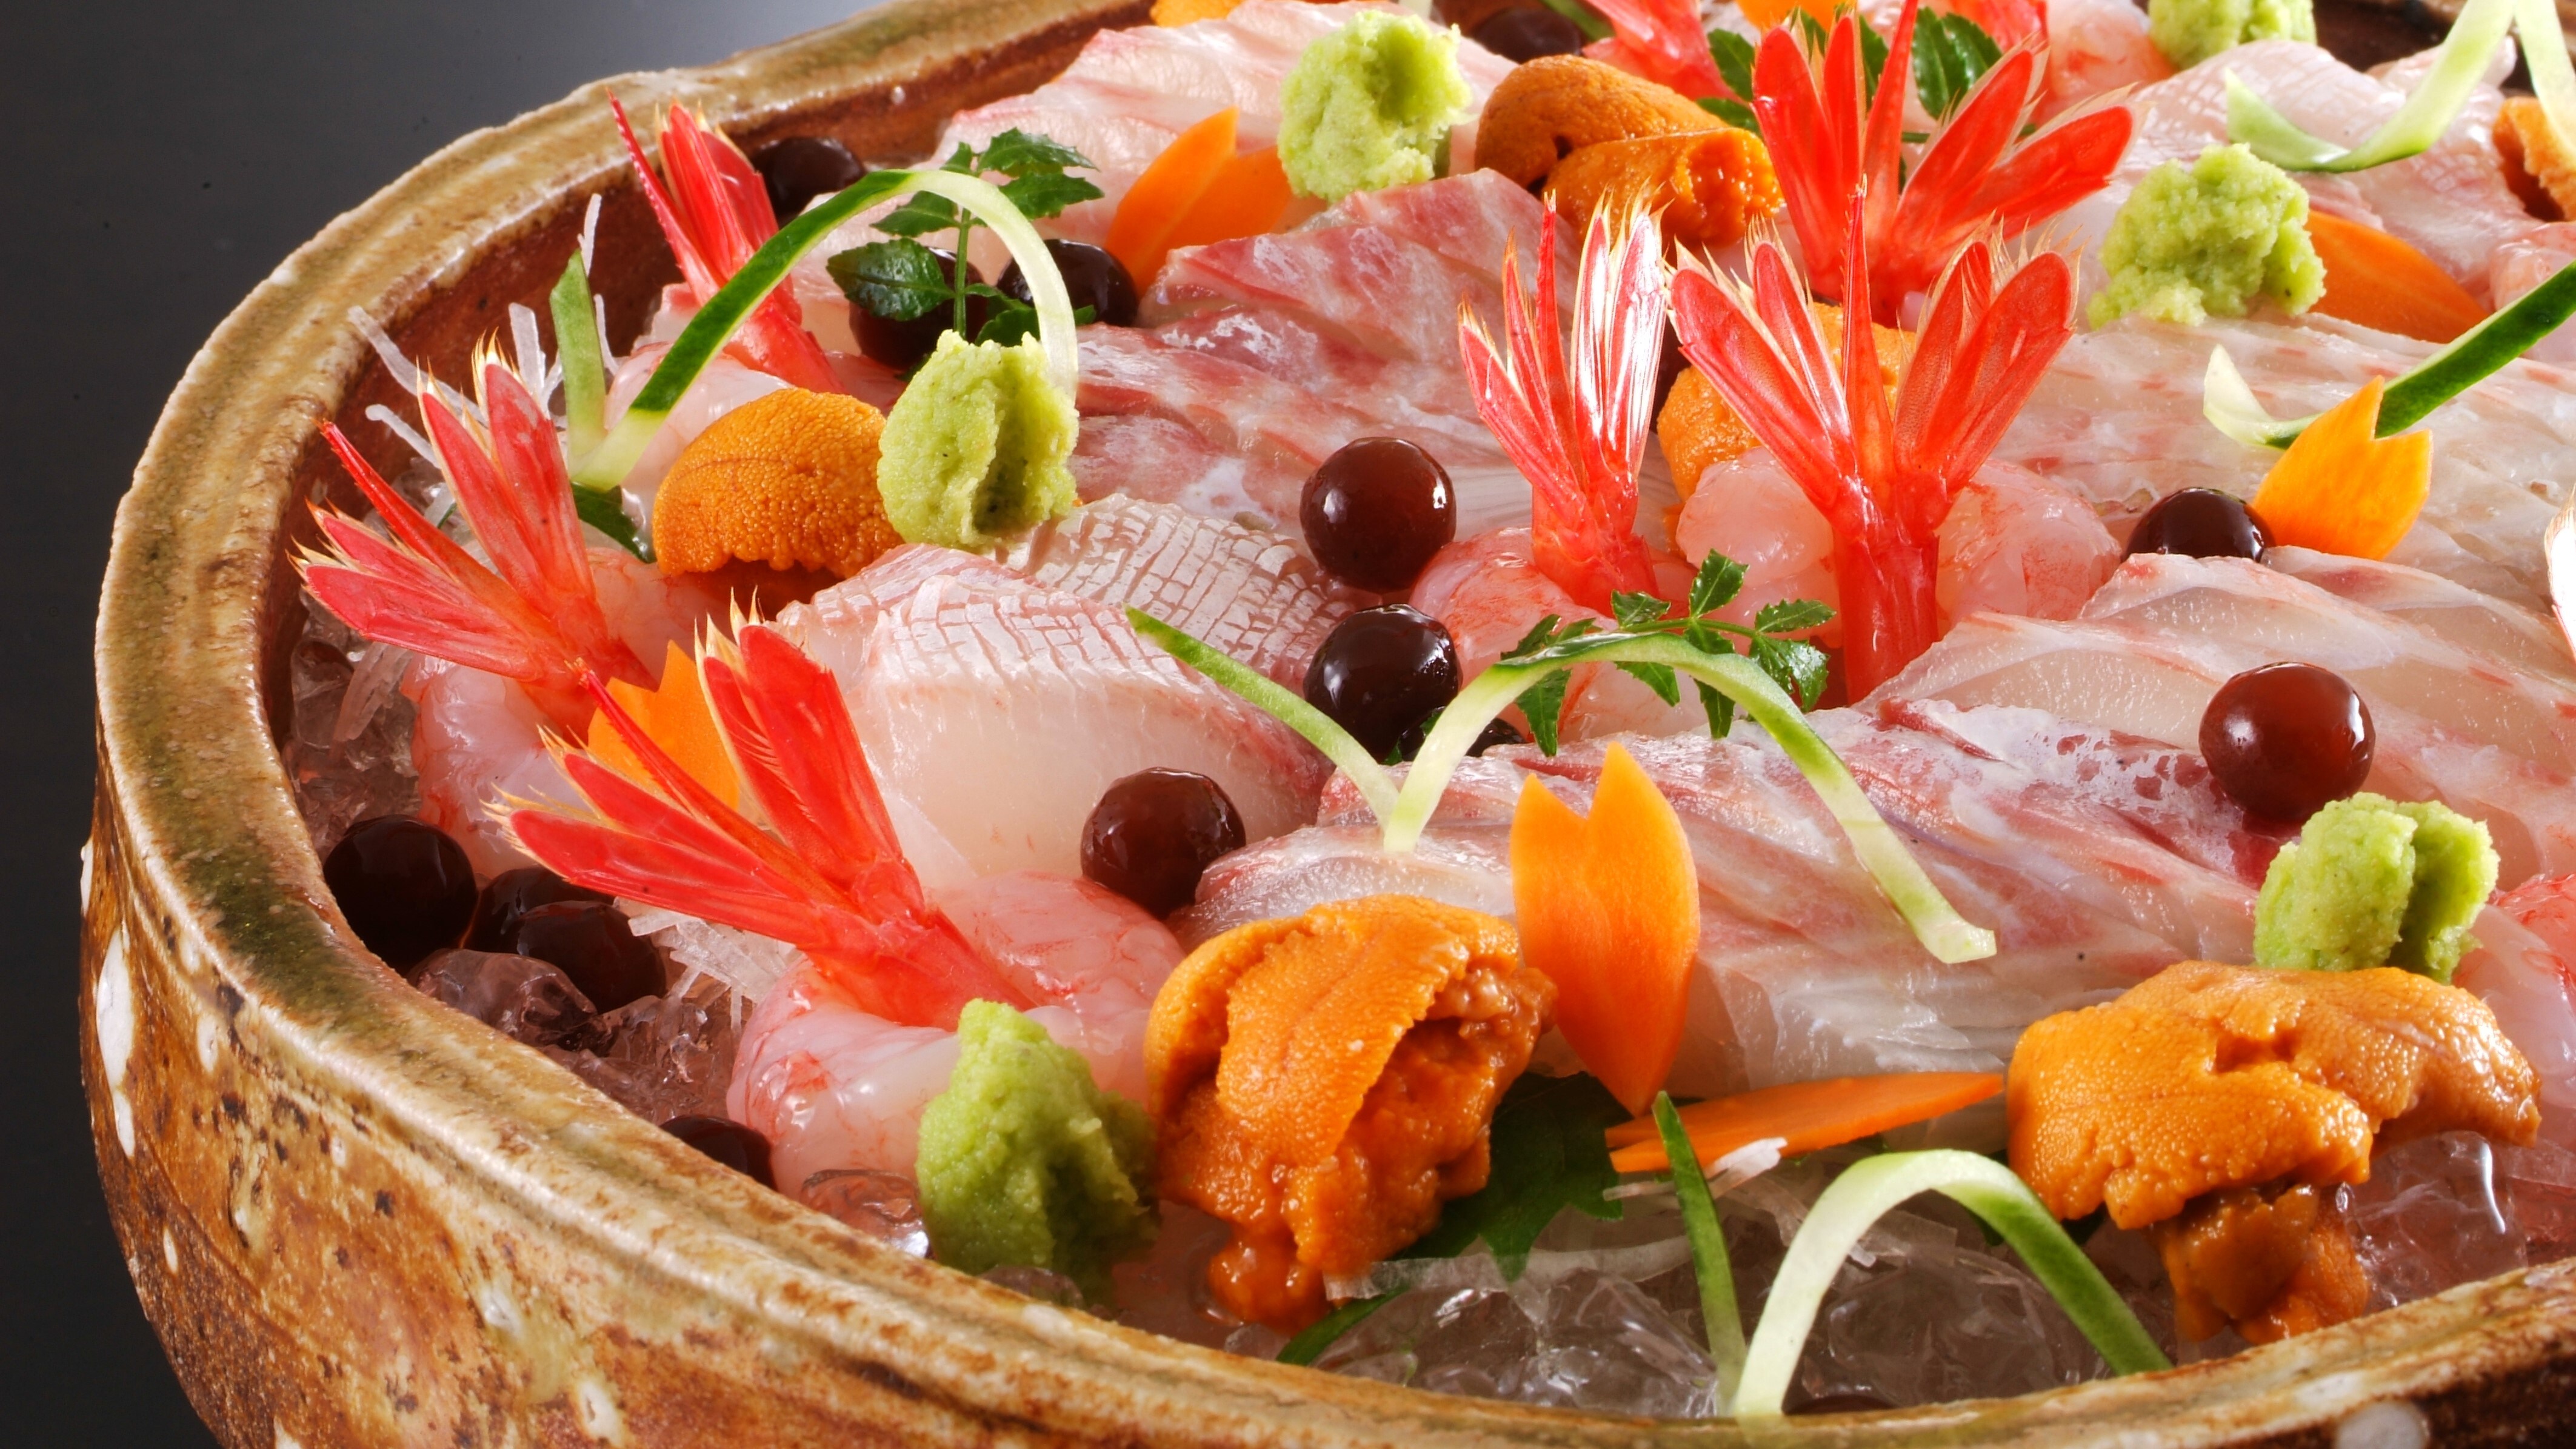 [Sashimi] At this hotel, you can enjoy the fresh and delicious seasonal sashimi of the Sea of Japan landed from the Taiza fishing port.